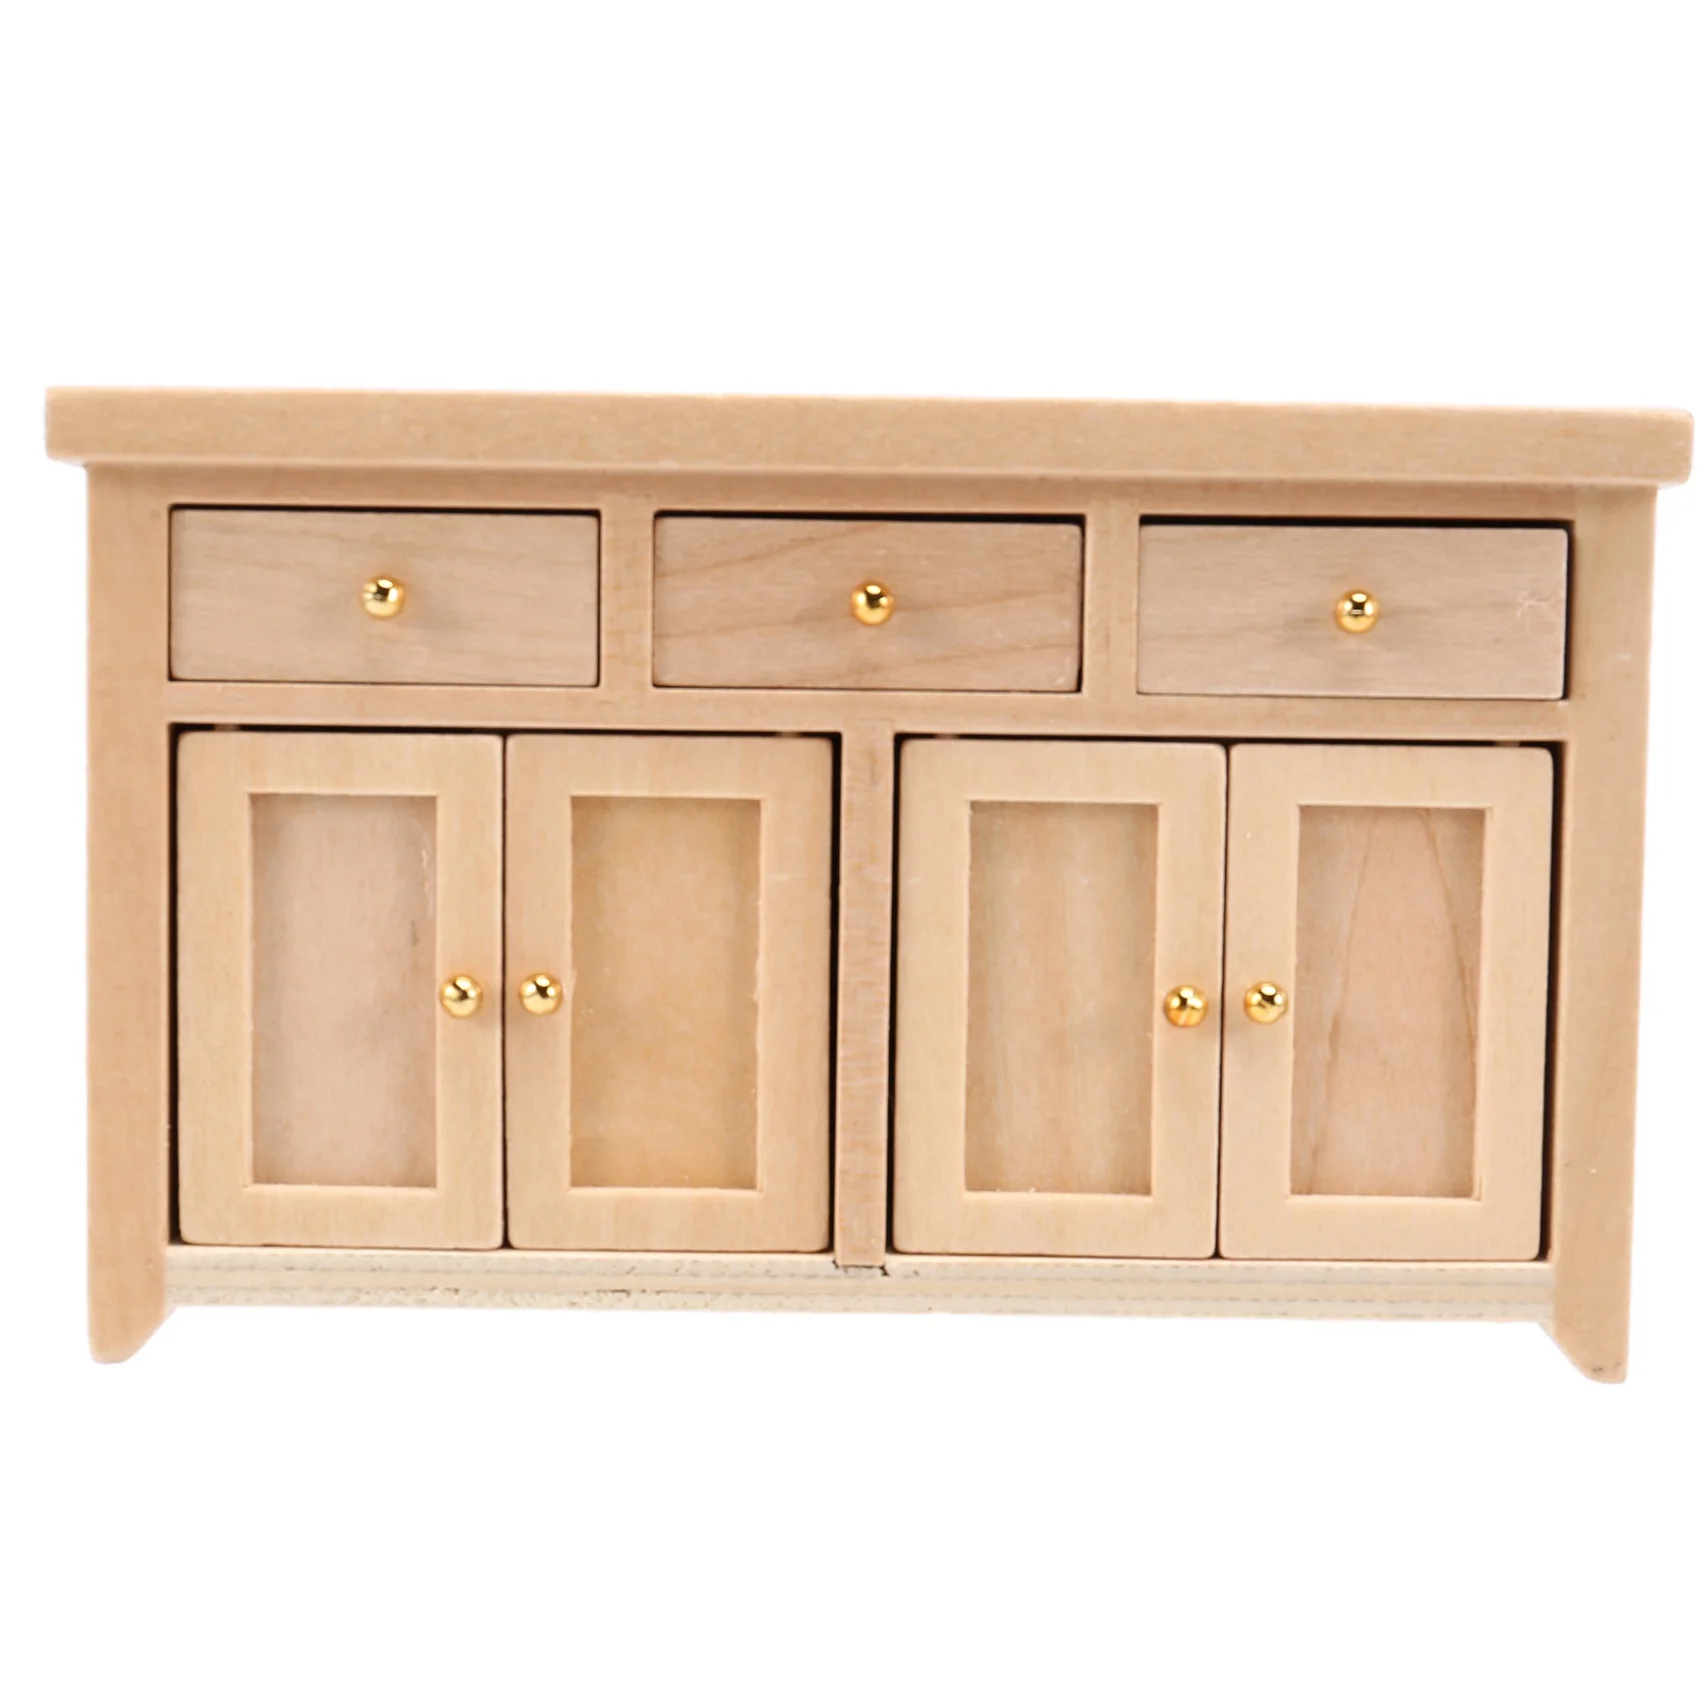 

1:12 DollHouse Furniture Miniature Kitchen Sideboard Living Room Cabinet Closet Shelf 3 Drawer 2 Door Console Table B